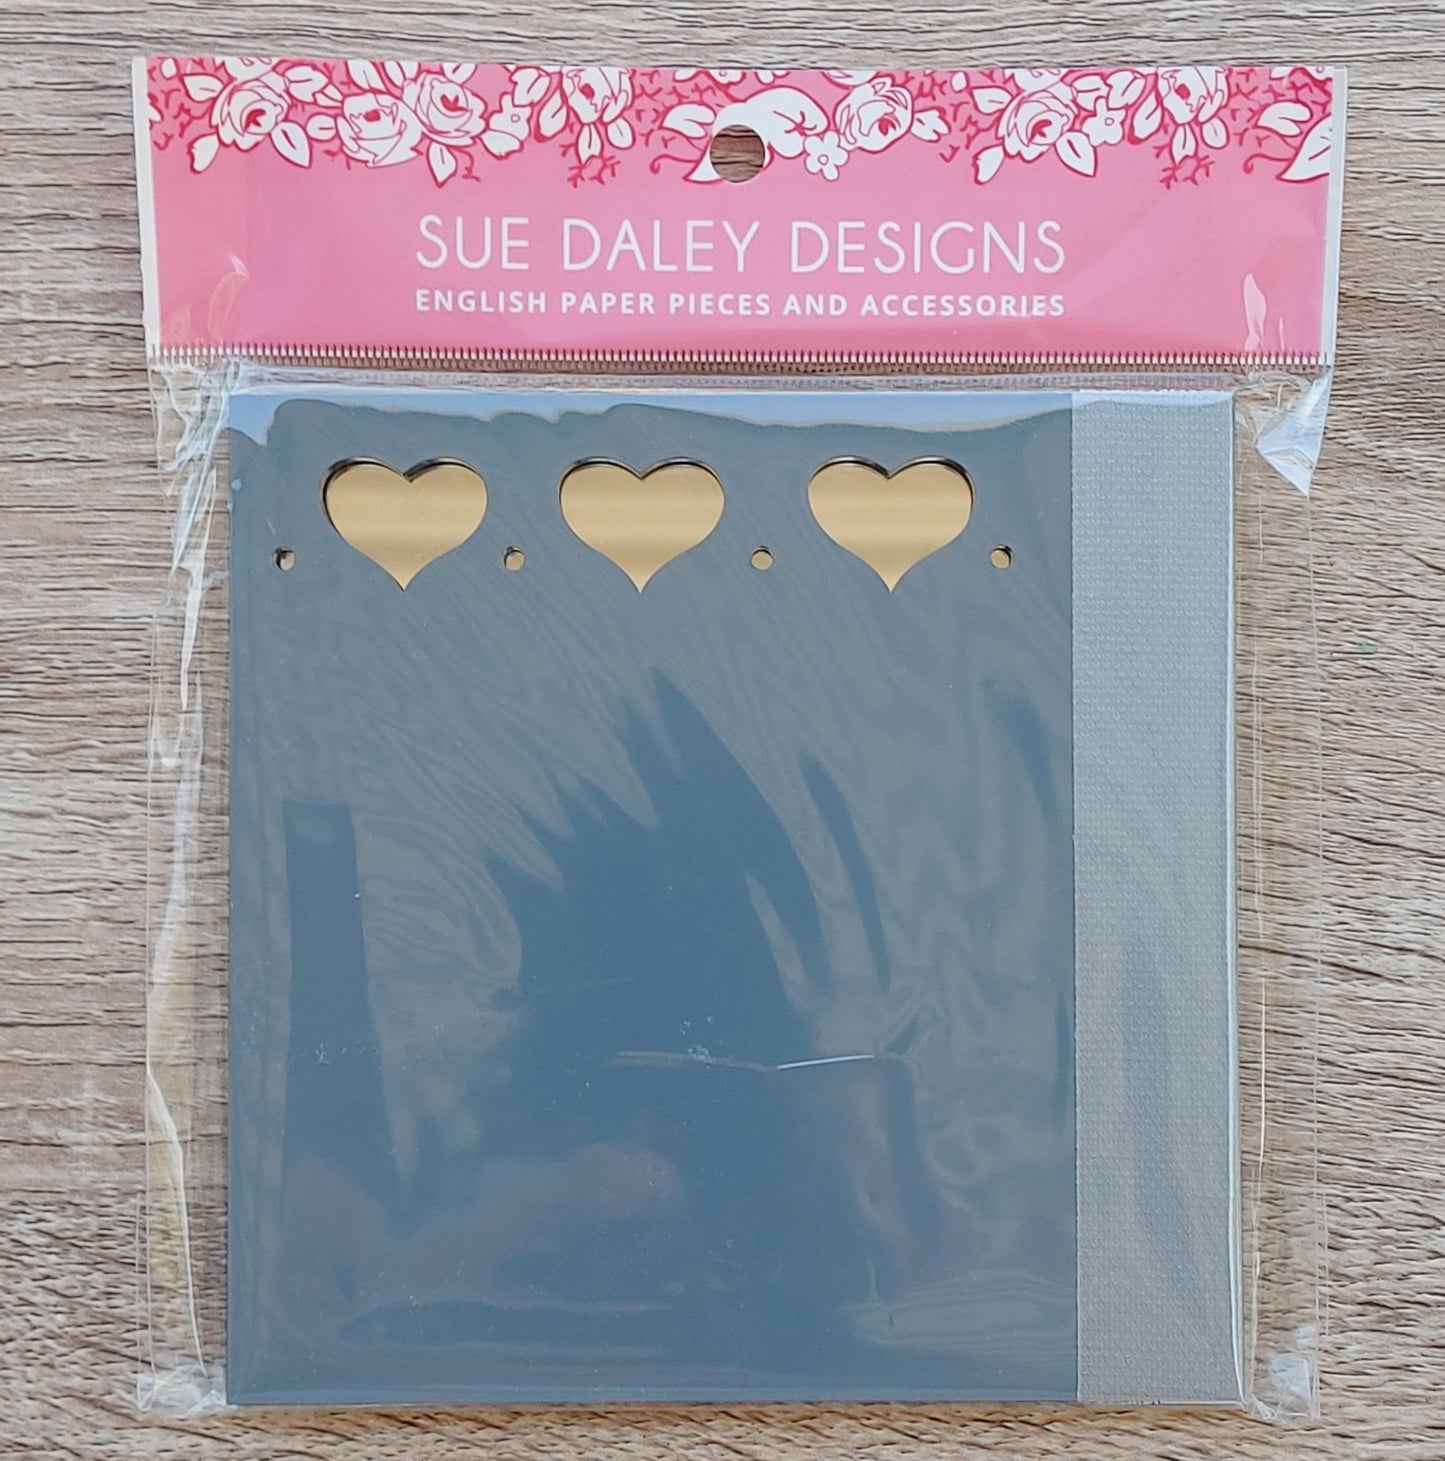 Double sided fussy cutting mirror for fabric patchwork, English paper piecing Sue Daley Designs